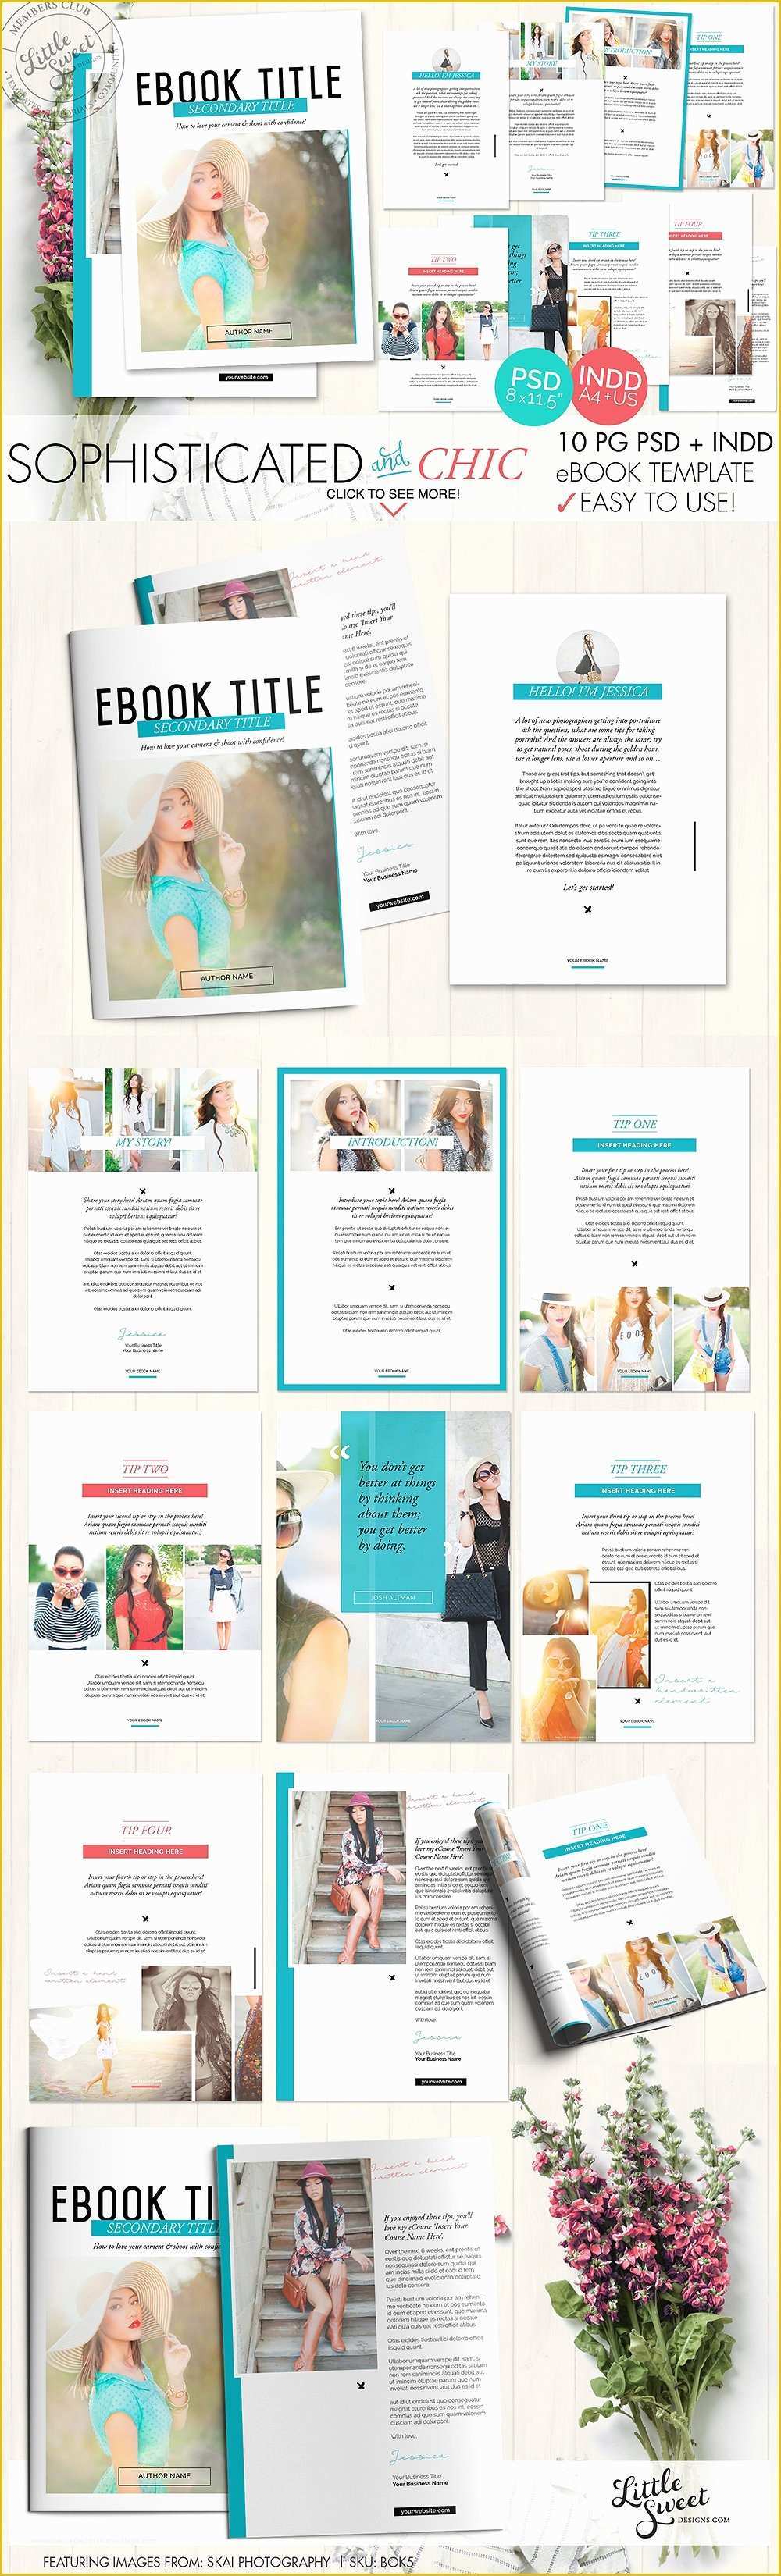 Free Ebook Template Indesign Of 10page Ebook Template Indesign Pho Magazine Templates